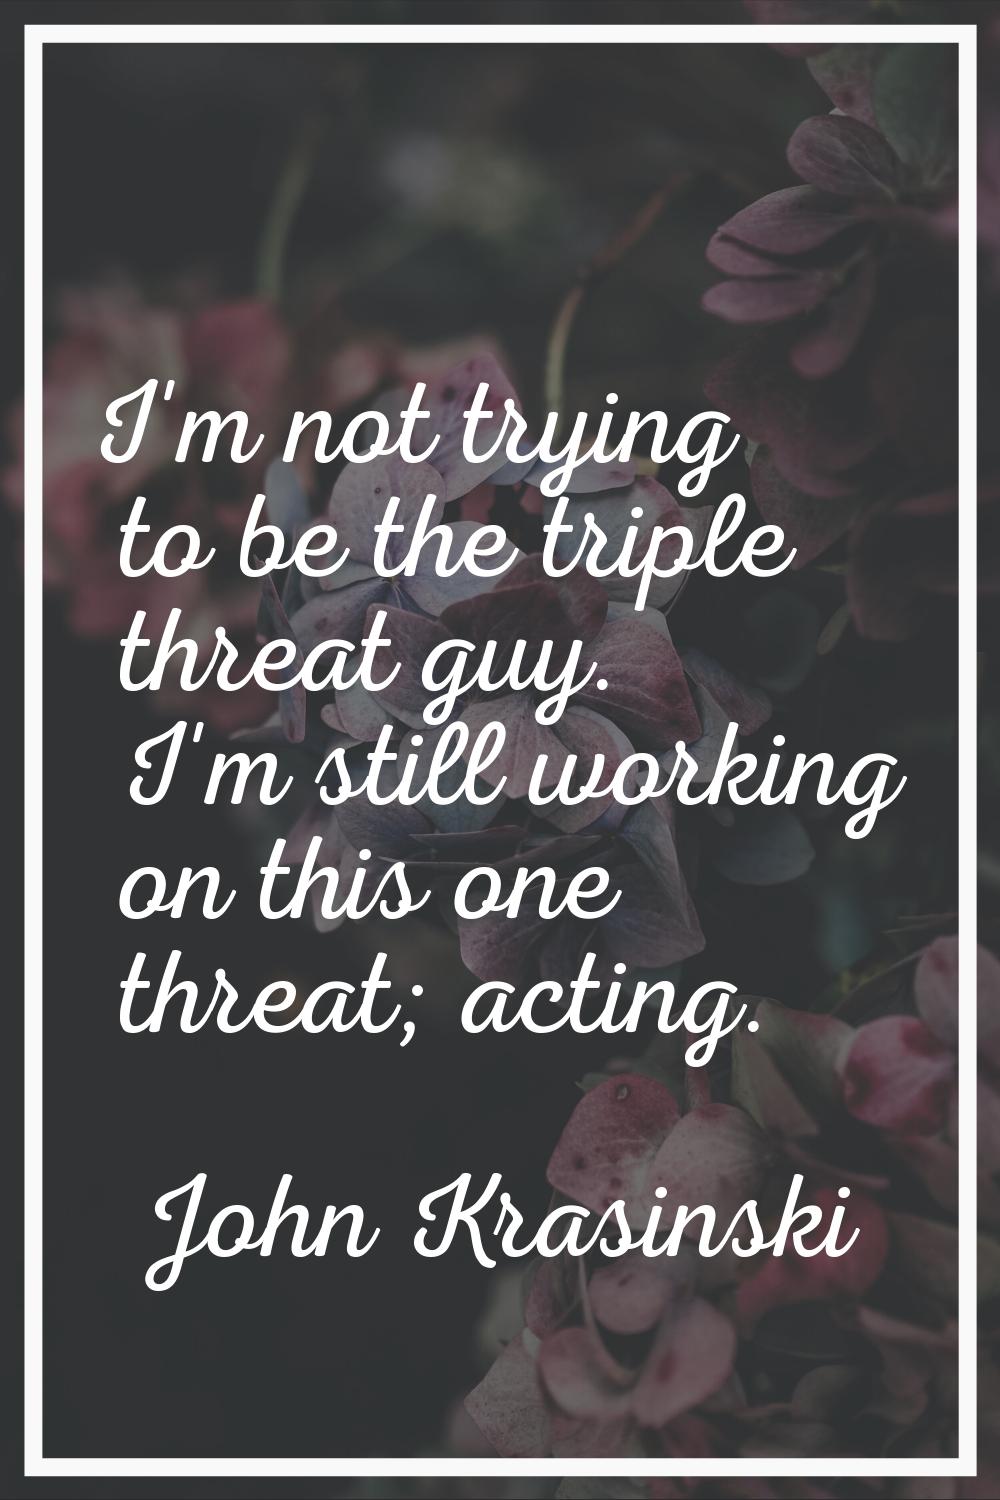 I'm not trying to be the triple threat guy. I'm still working on this one threat; acting.